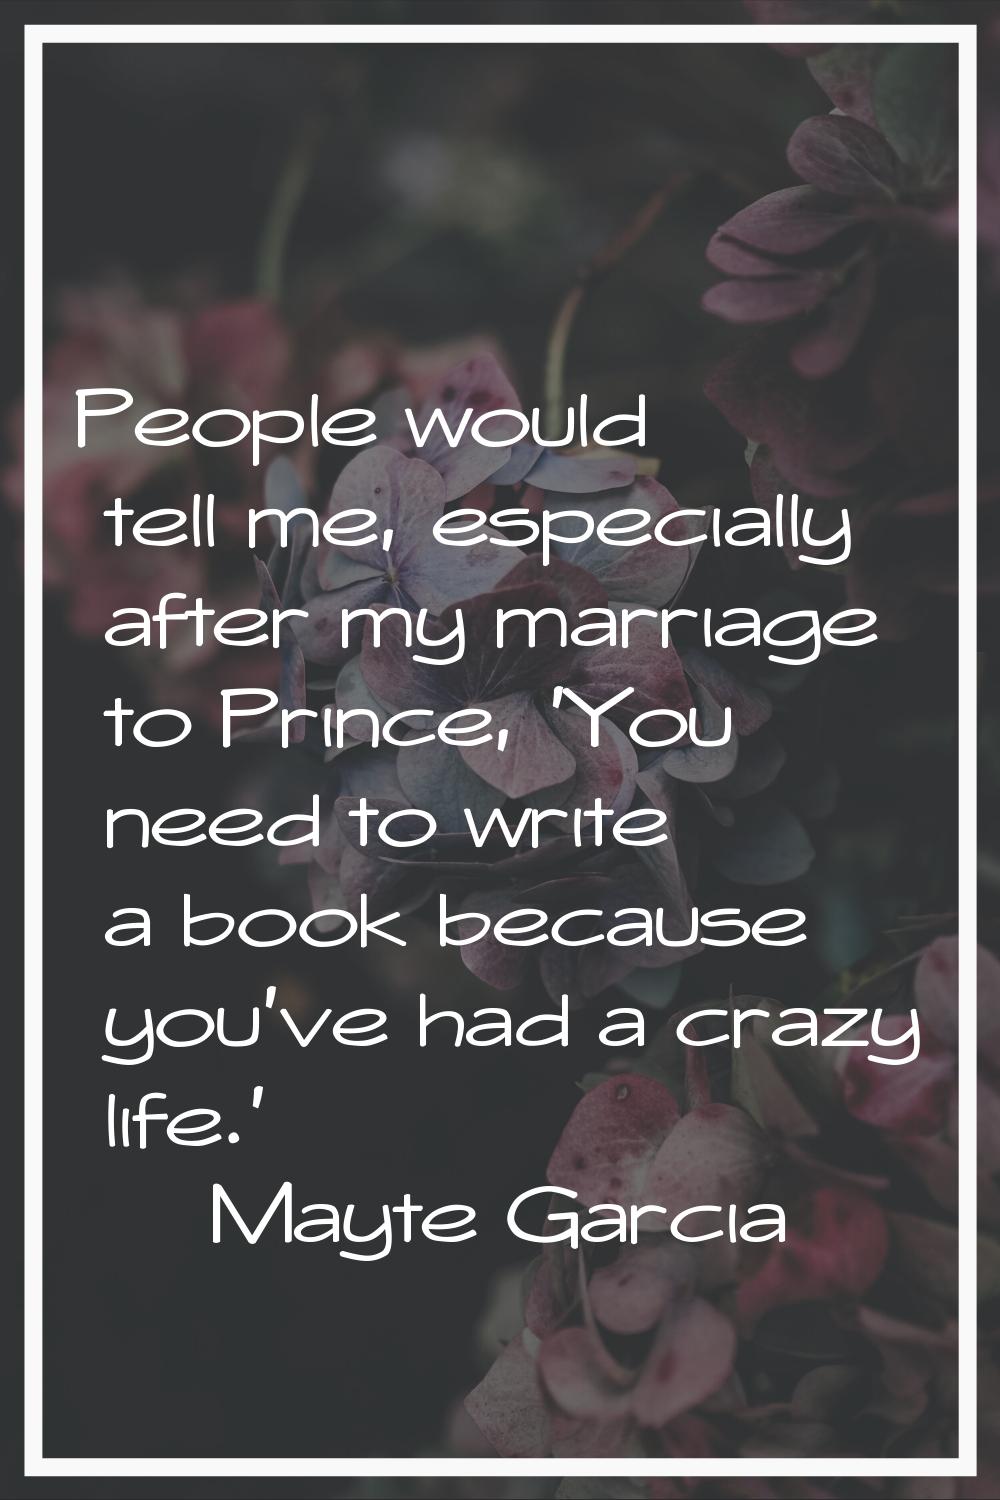 People would tell me, especially after my marriage to Prince, 'You need to write a book because you